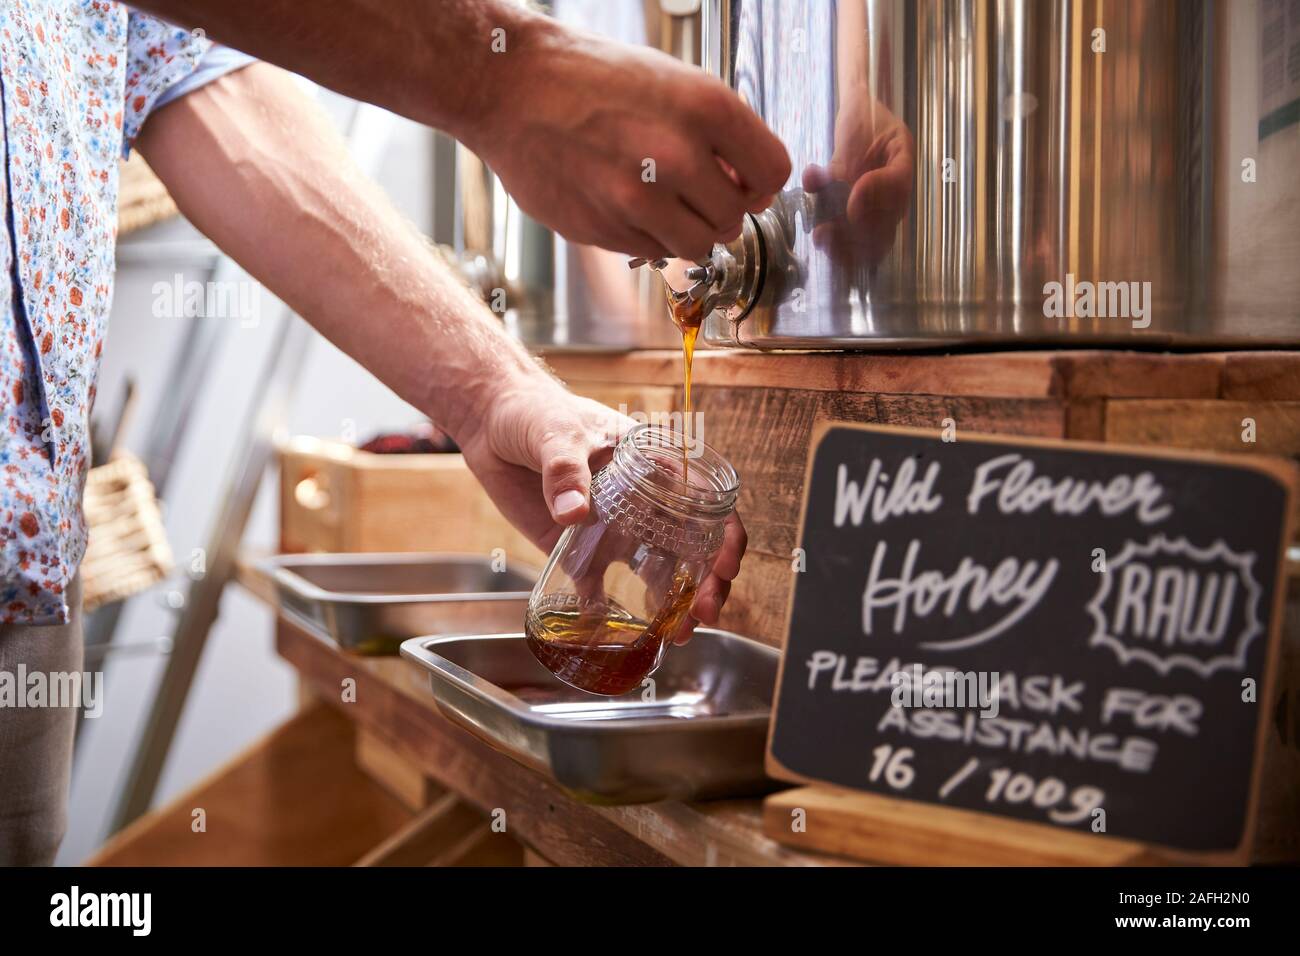 Man Filling Container With Wild Honey In Sustainable Plastic Free Grocery Store Stock Photo